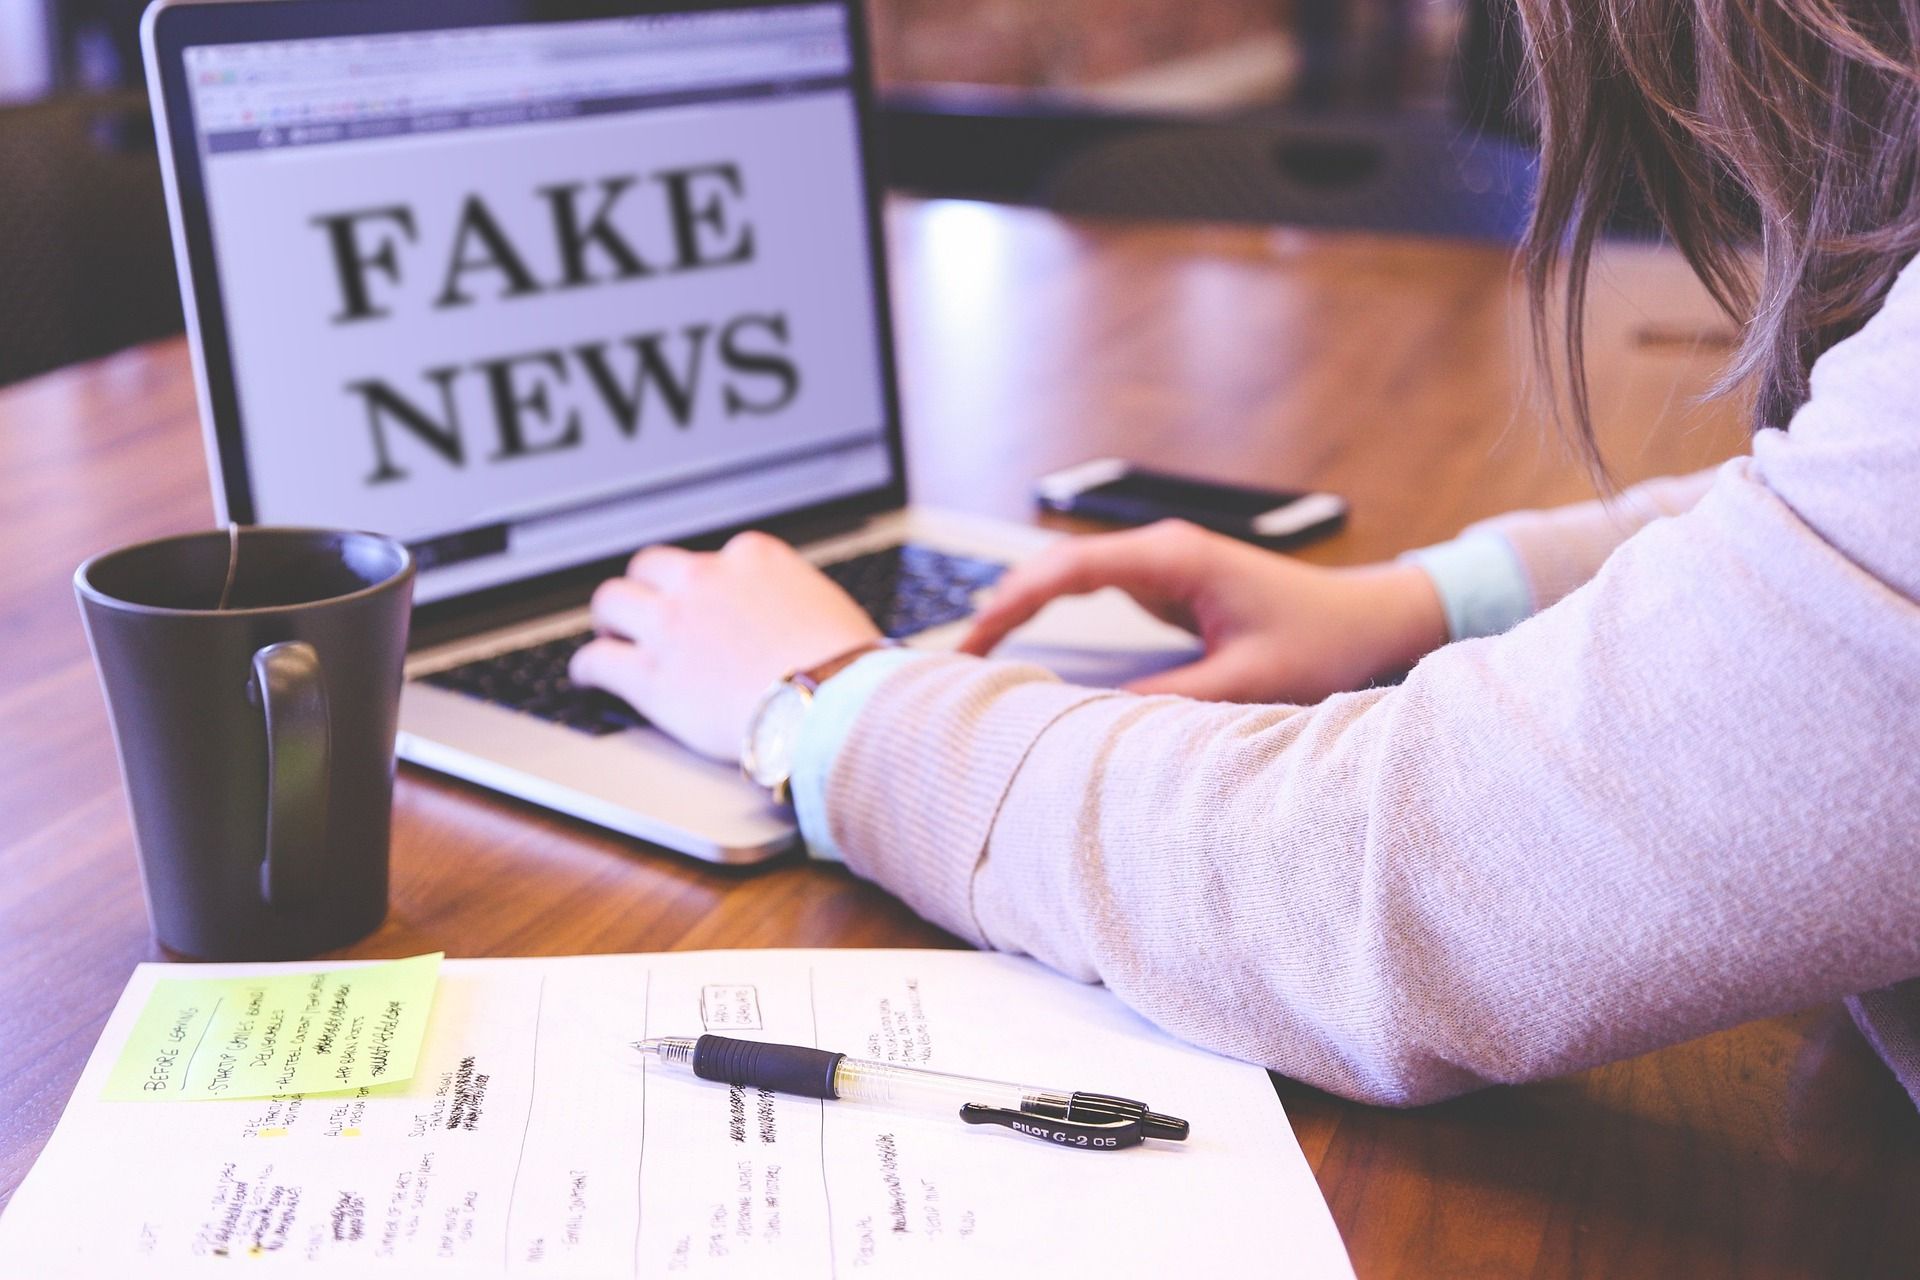 Cultural background: Almost half of Danes worry that their perspectives are skewed by ‘fake news’